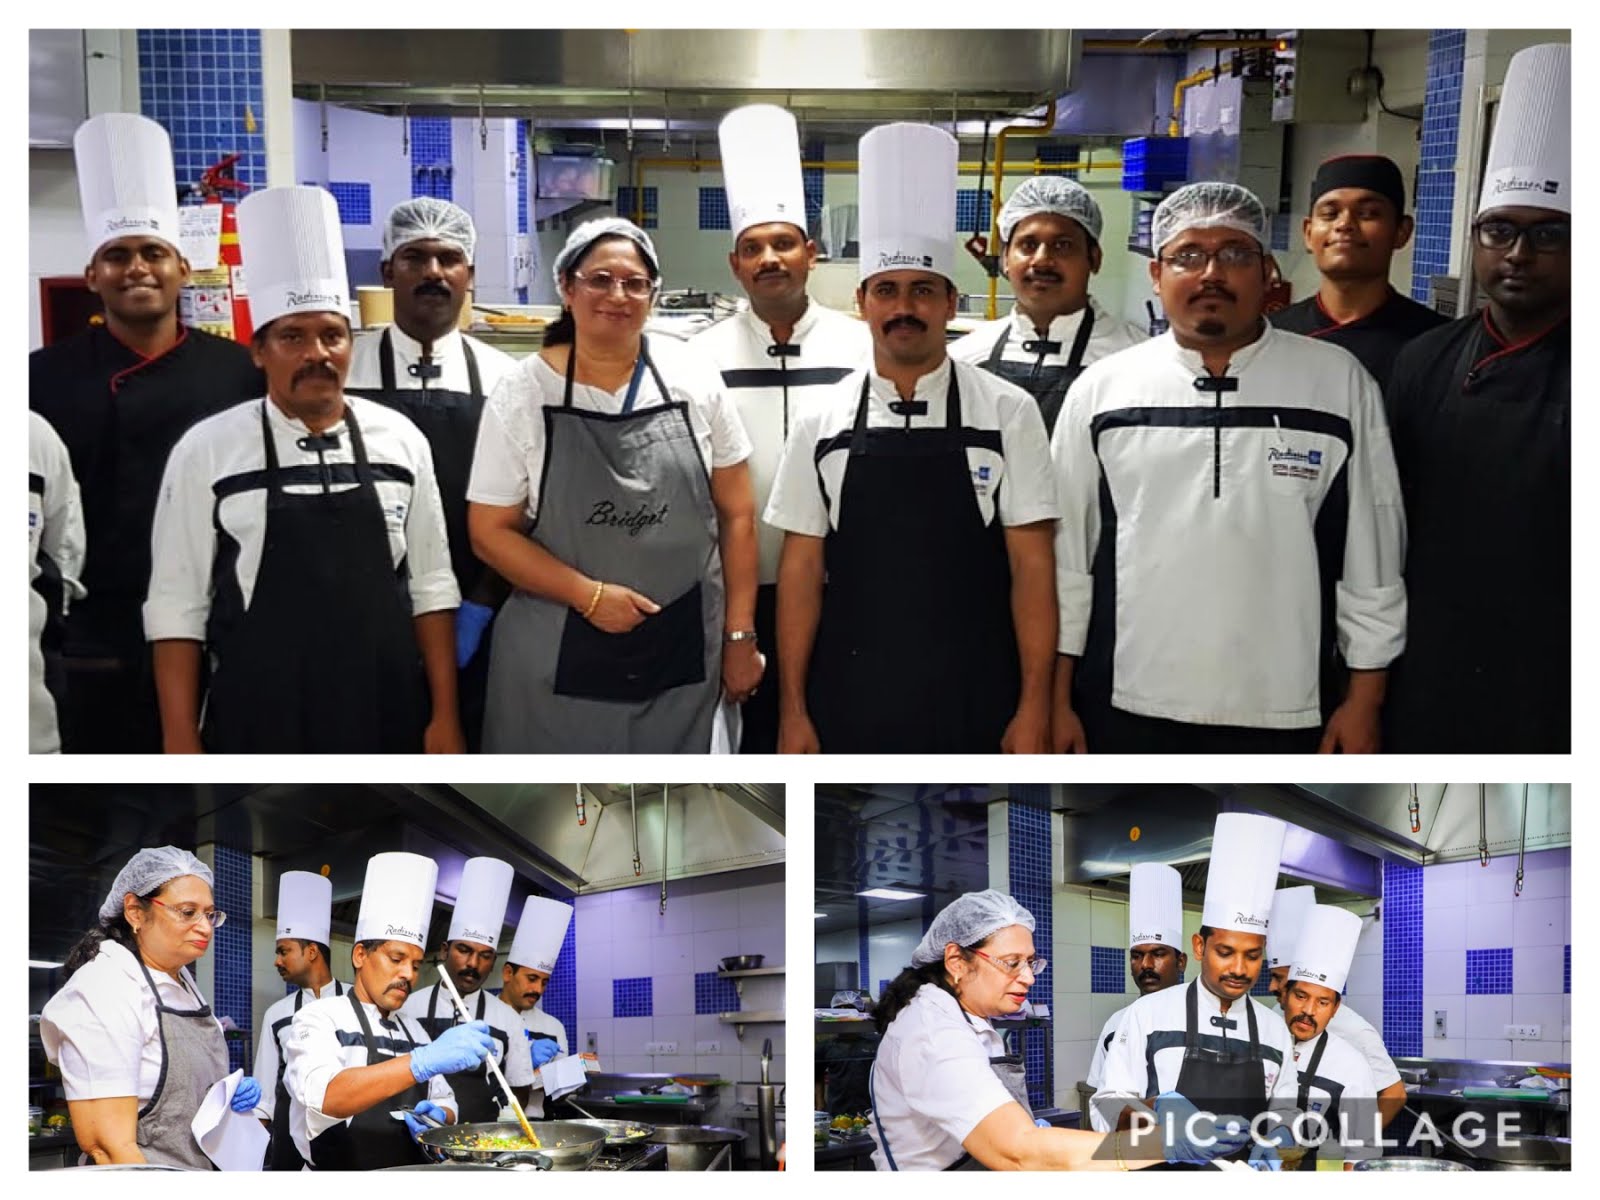 CULINARY TRAINING WORKSHOP IN ANGLO-INDIAN CUISINE AT RADISSON BLU GRT CHENNAI